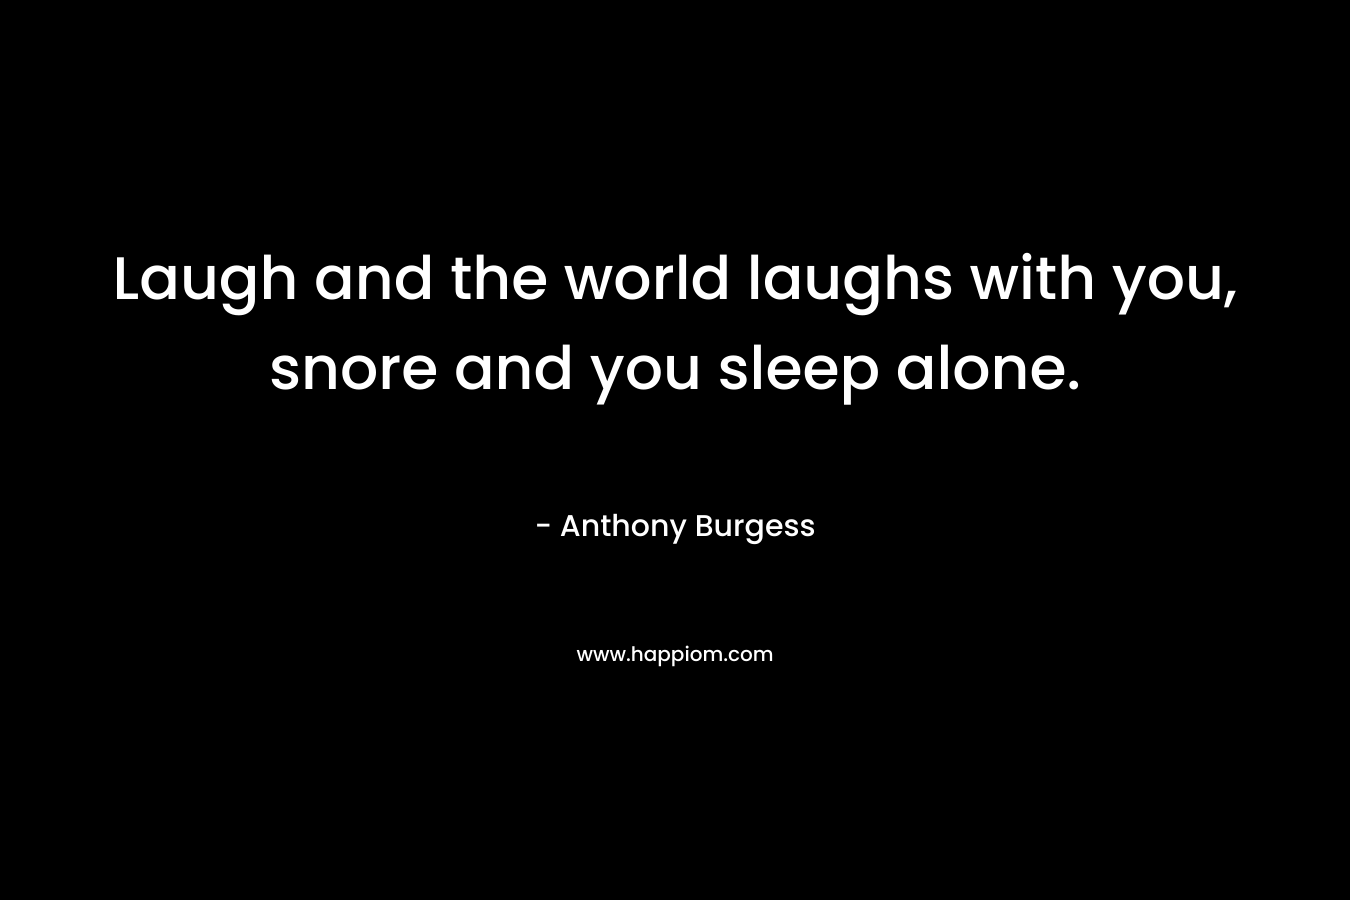 Laugh and the world laughs with you, snore and you sleep alone. – Anthony Burgess